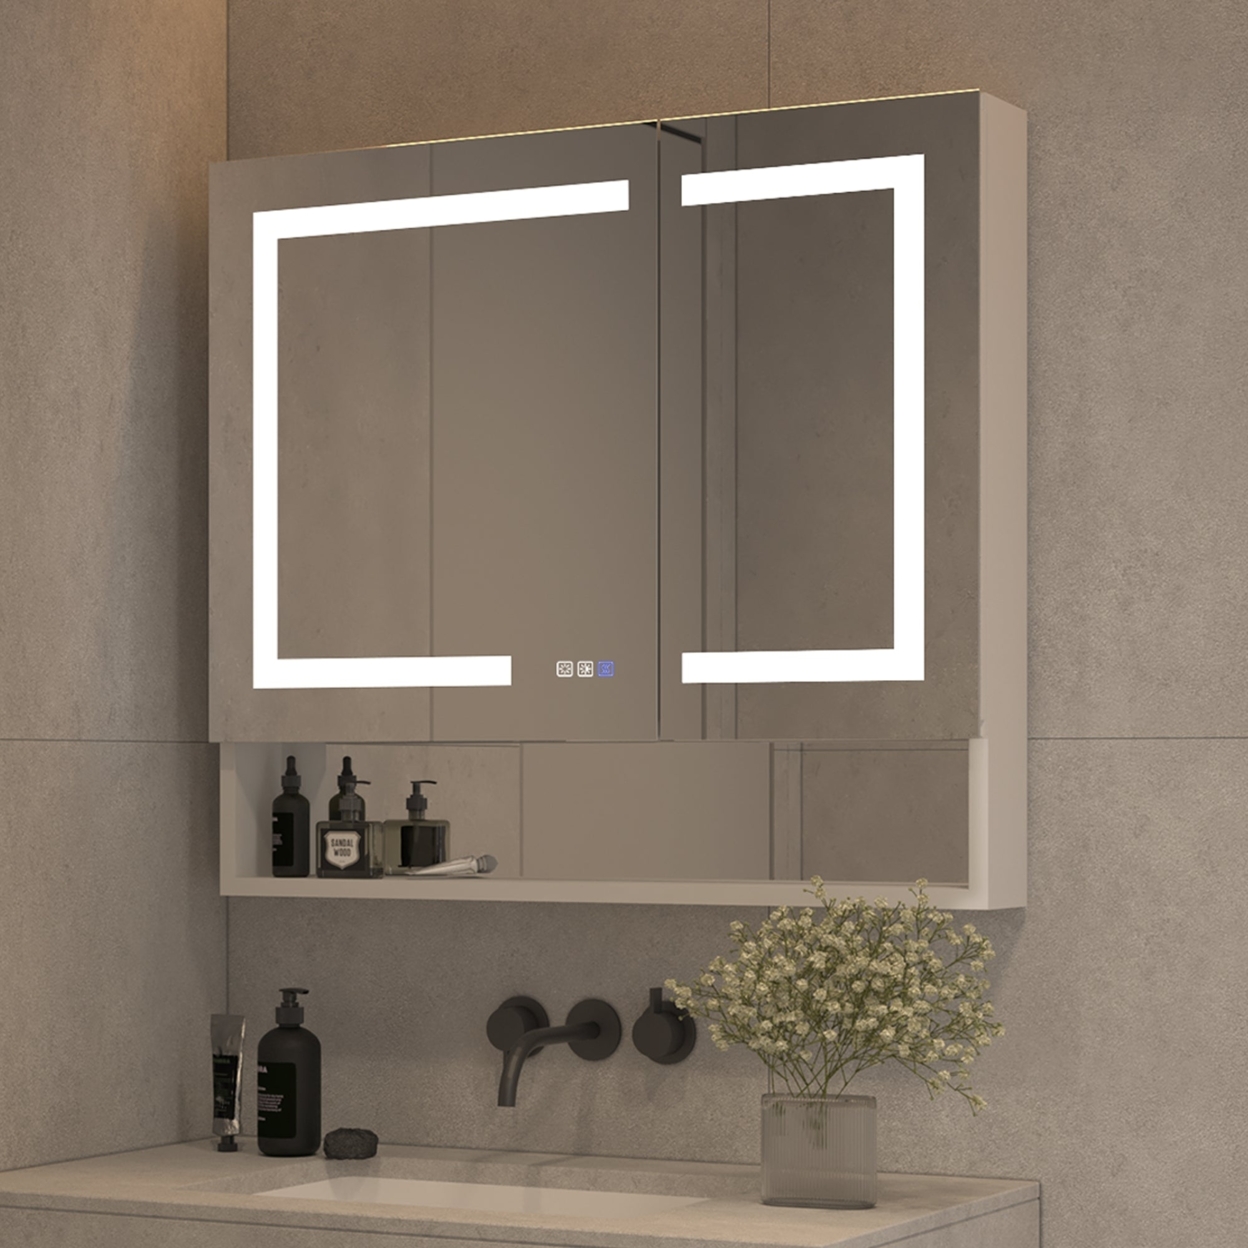 ExBrite 36'' x 32'' Surface or Recessed Mount Led Light Medicine Cabinet with Mirror